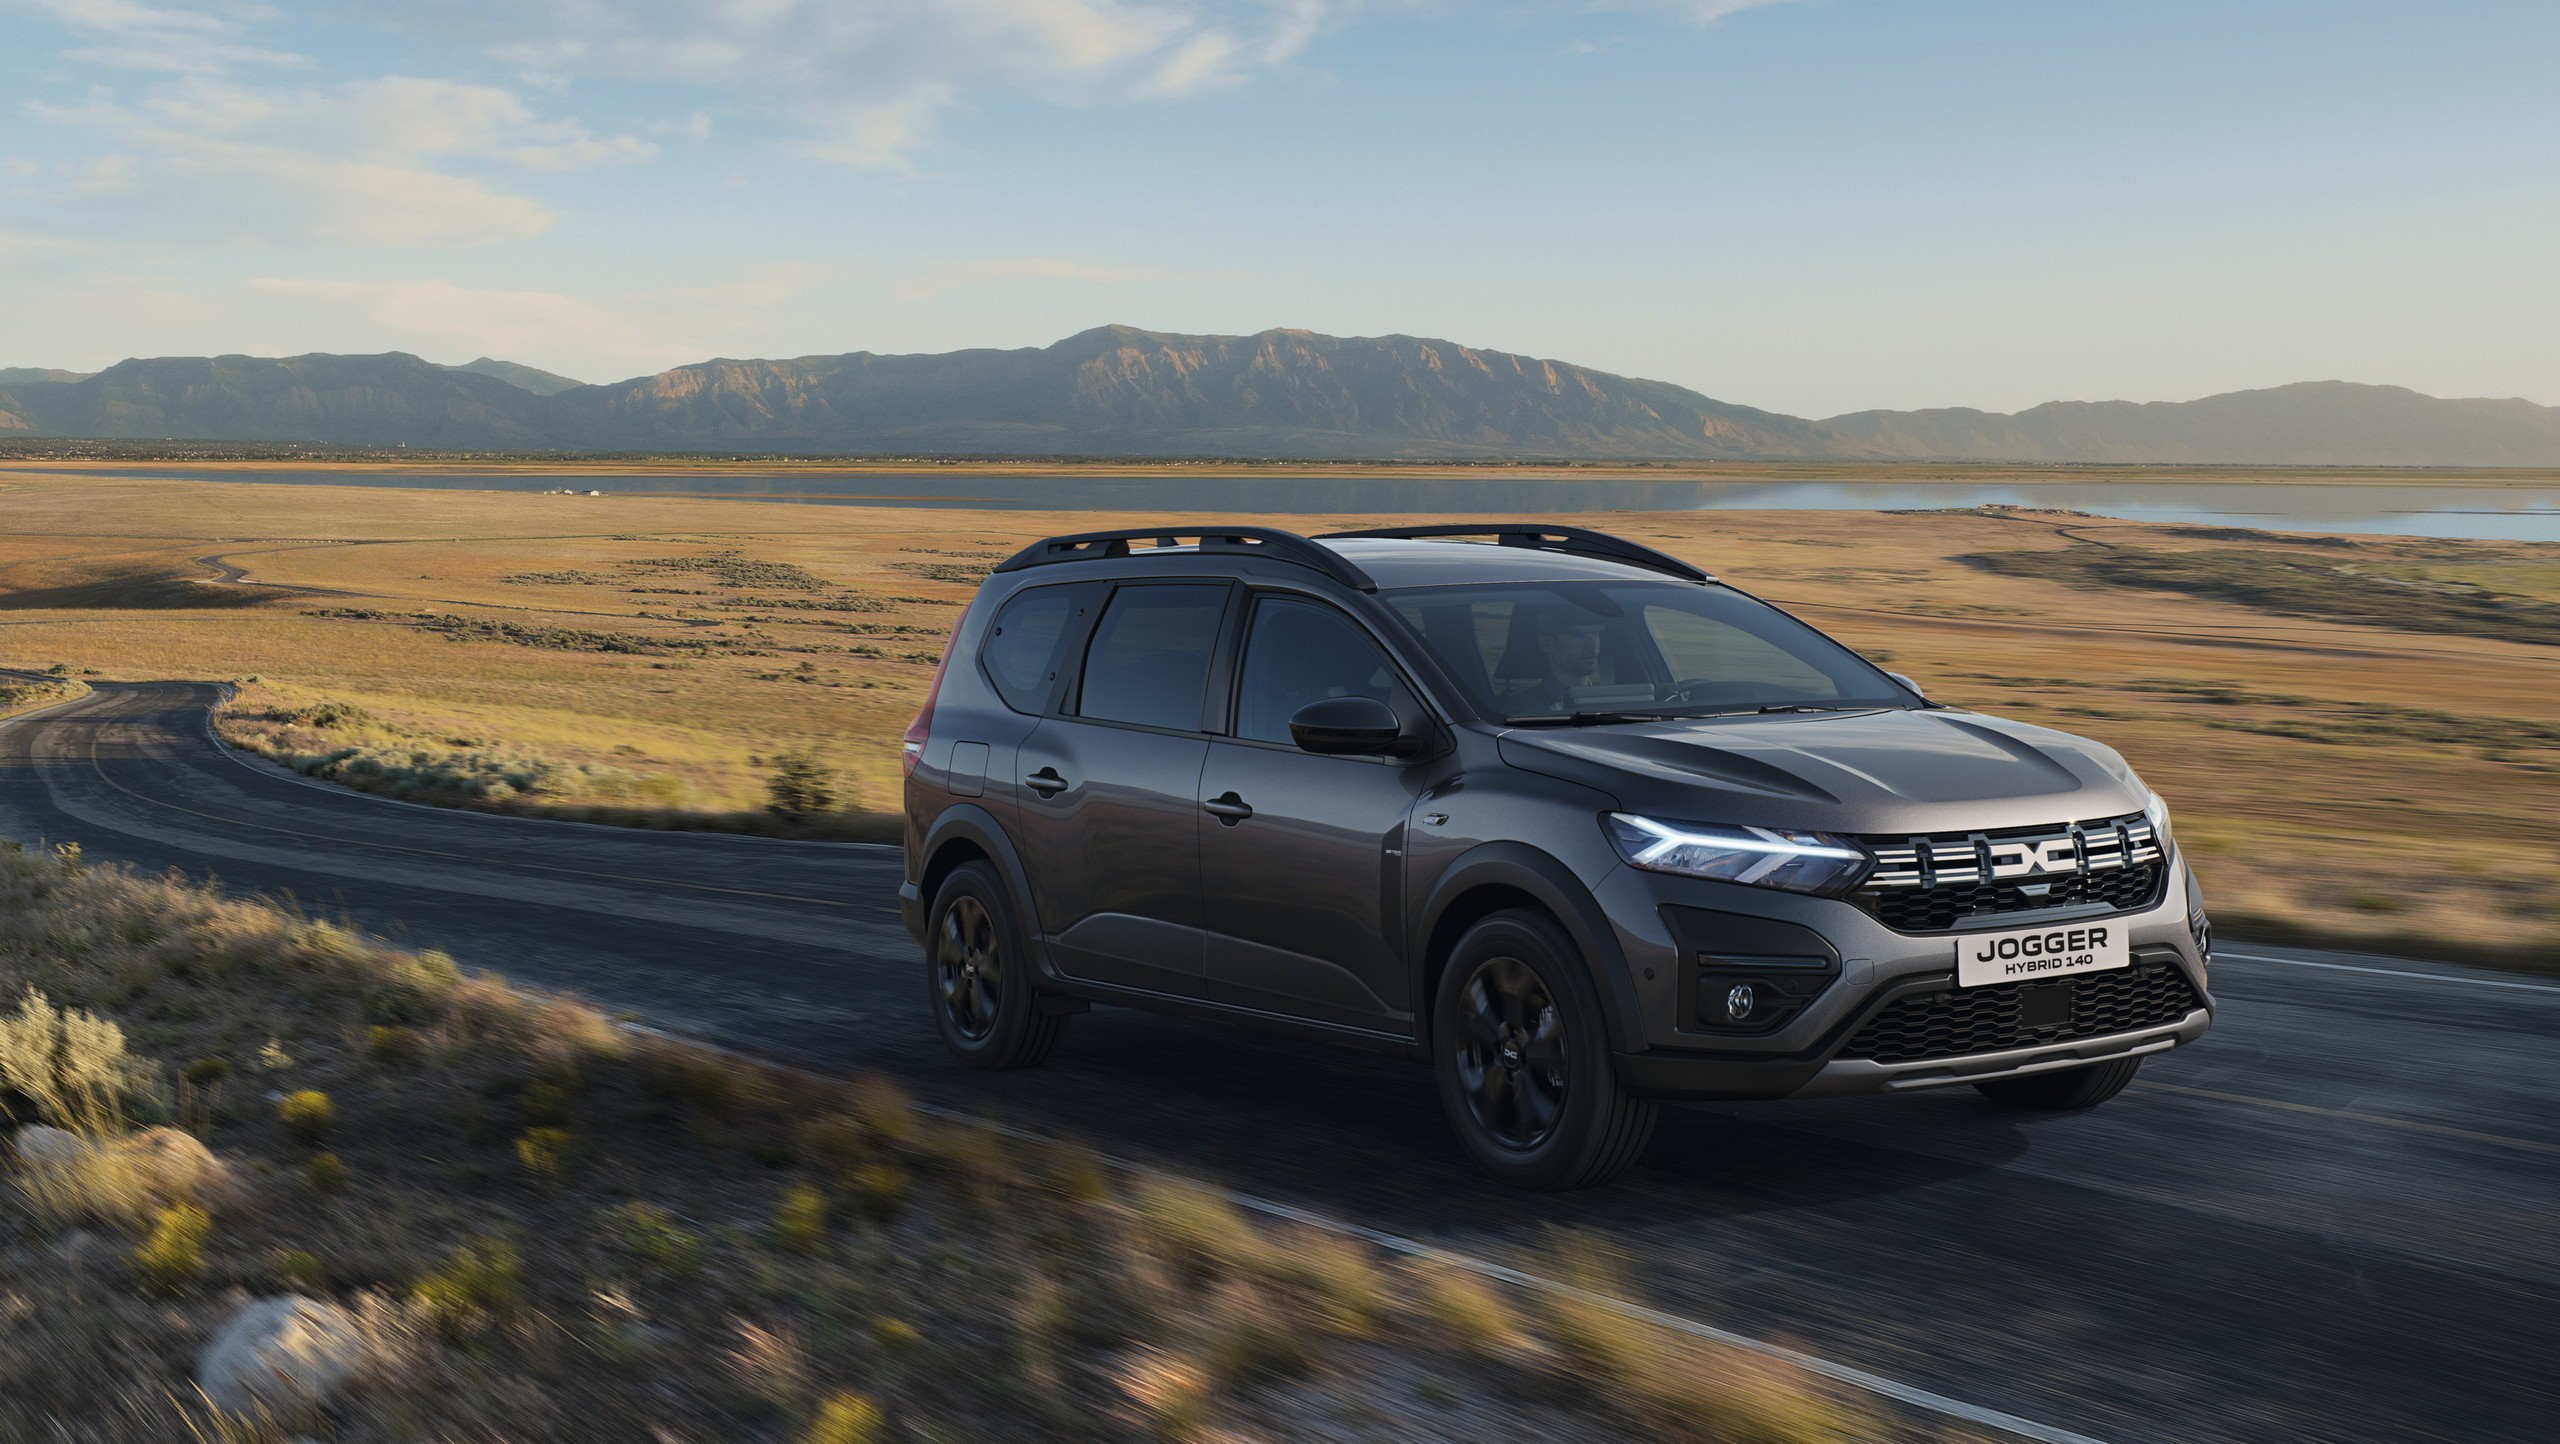 Dacia Jogger offers genuine 7-seater practicality at an unparalleled price.  Budget family MPVs don't get better than this. - EuropeanLife Media